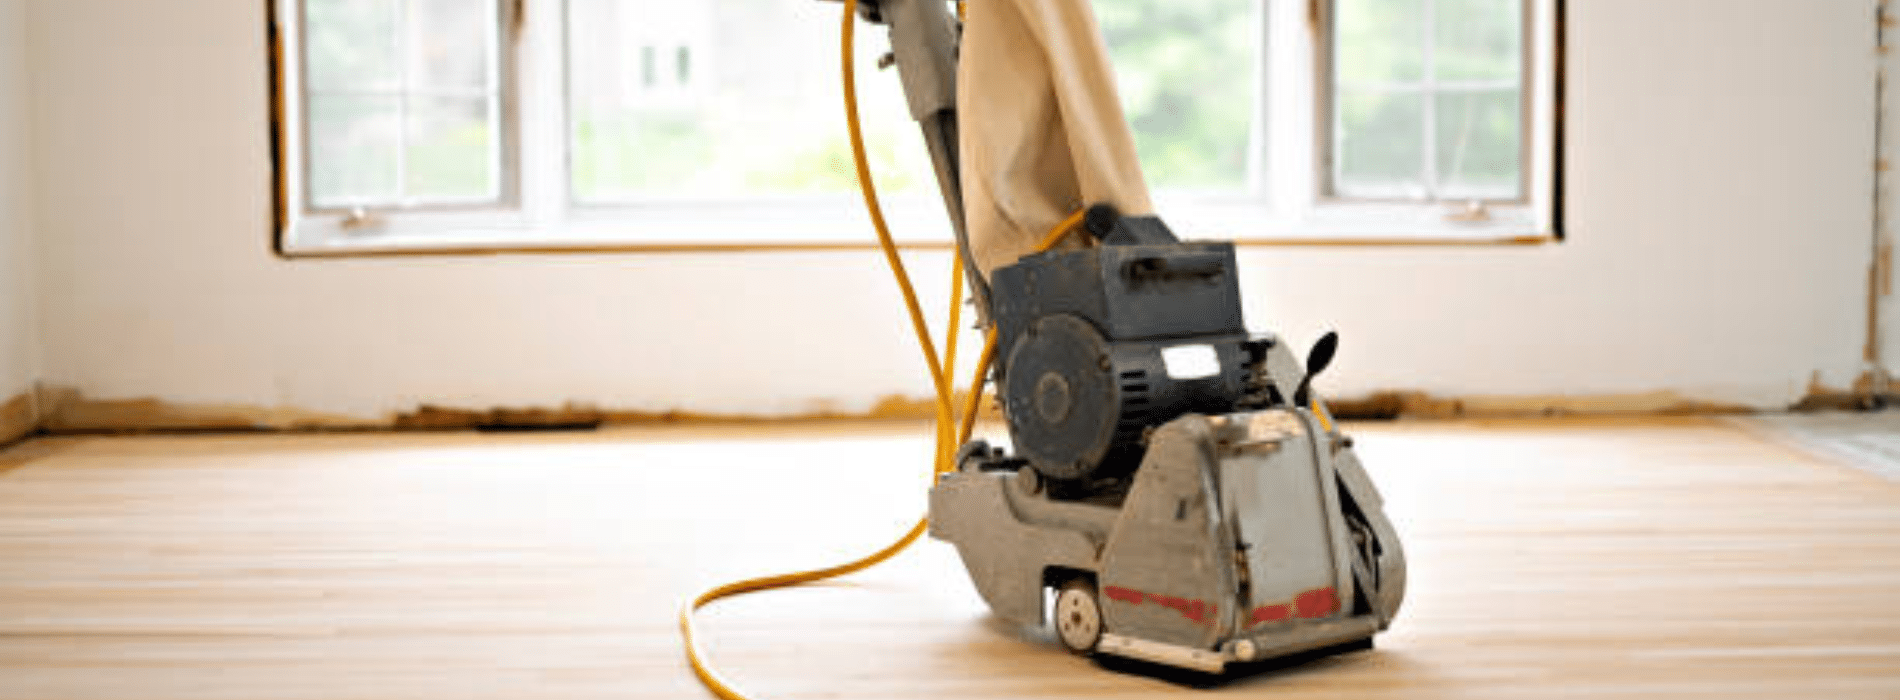 In Redbridge, IG4, Mr Sander® use the Bona Belt UX sander (2.2 kW, 230V, 50 Hz) with a 200x750 mm size. Connect it to a dust extraction system with a HEPA filter for a clean and efficient sanding of parquet floors.